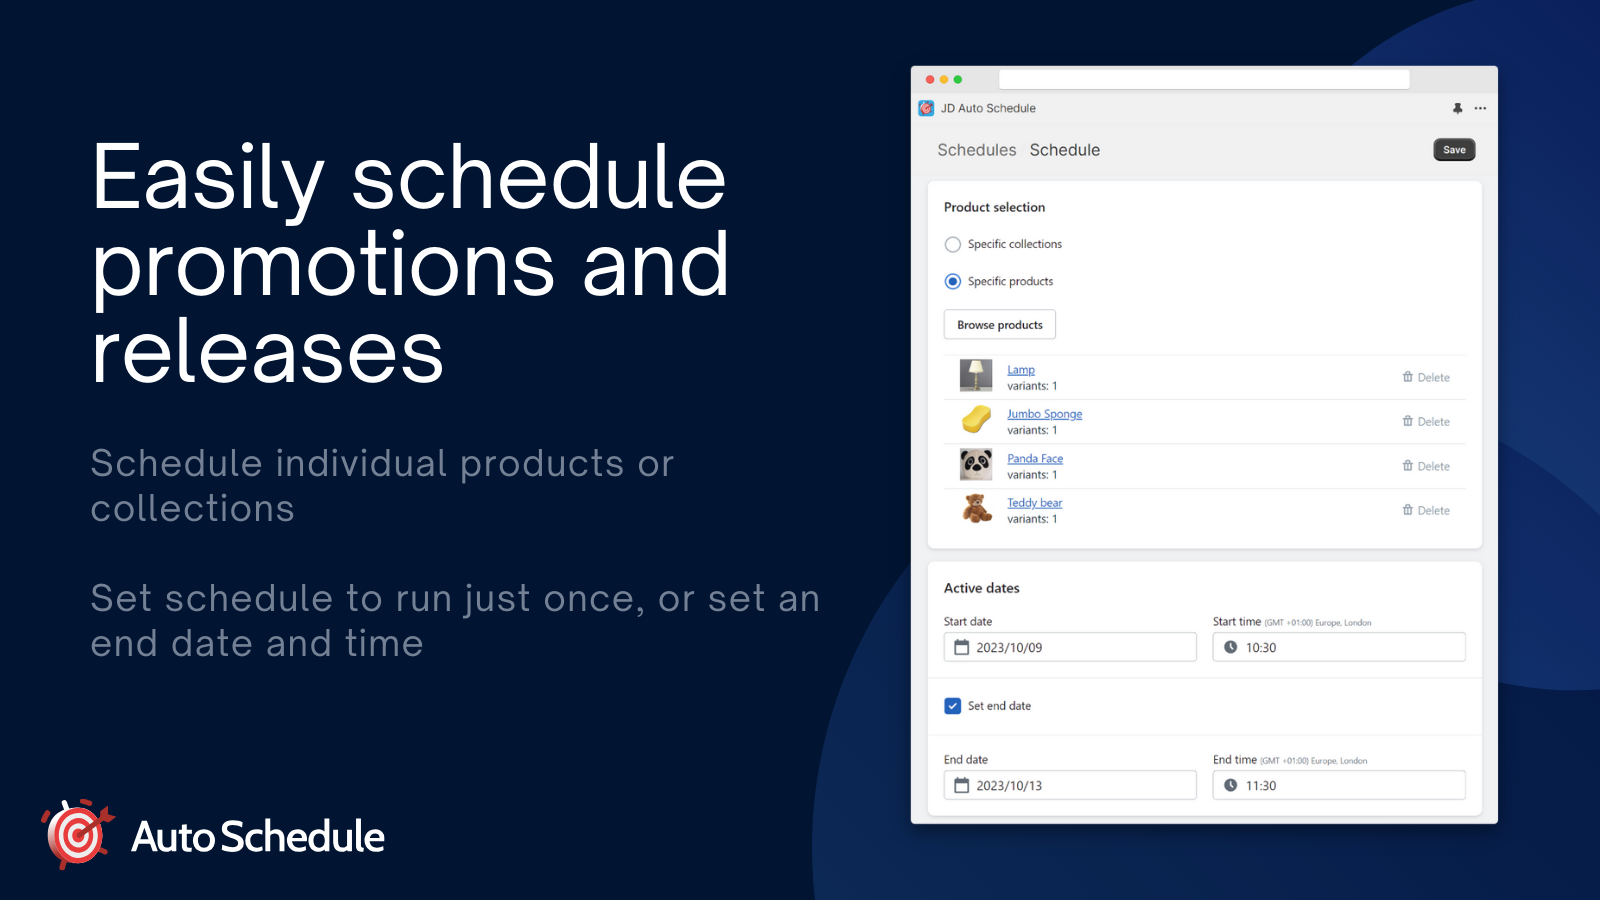 Easily schedule promotions and releases